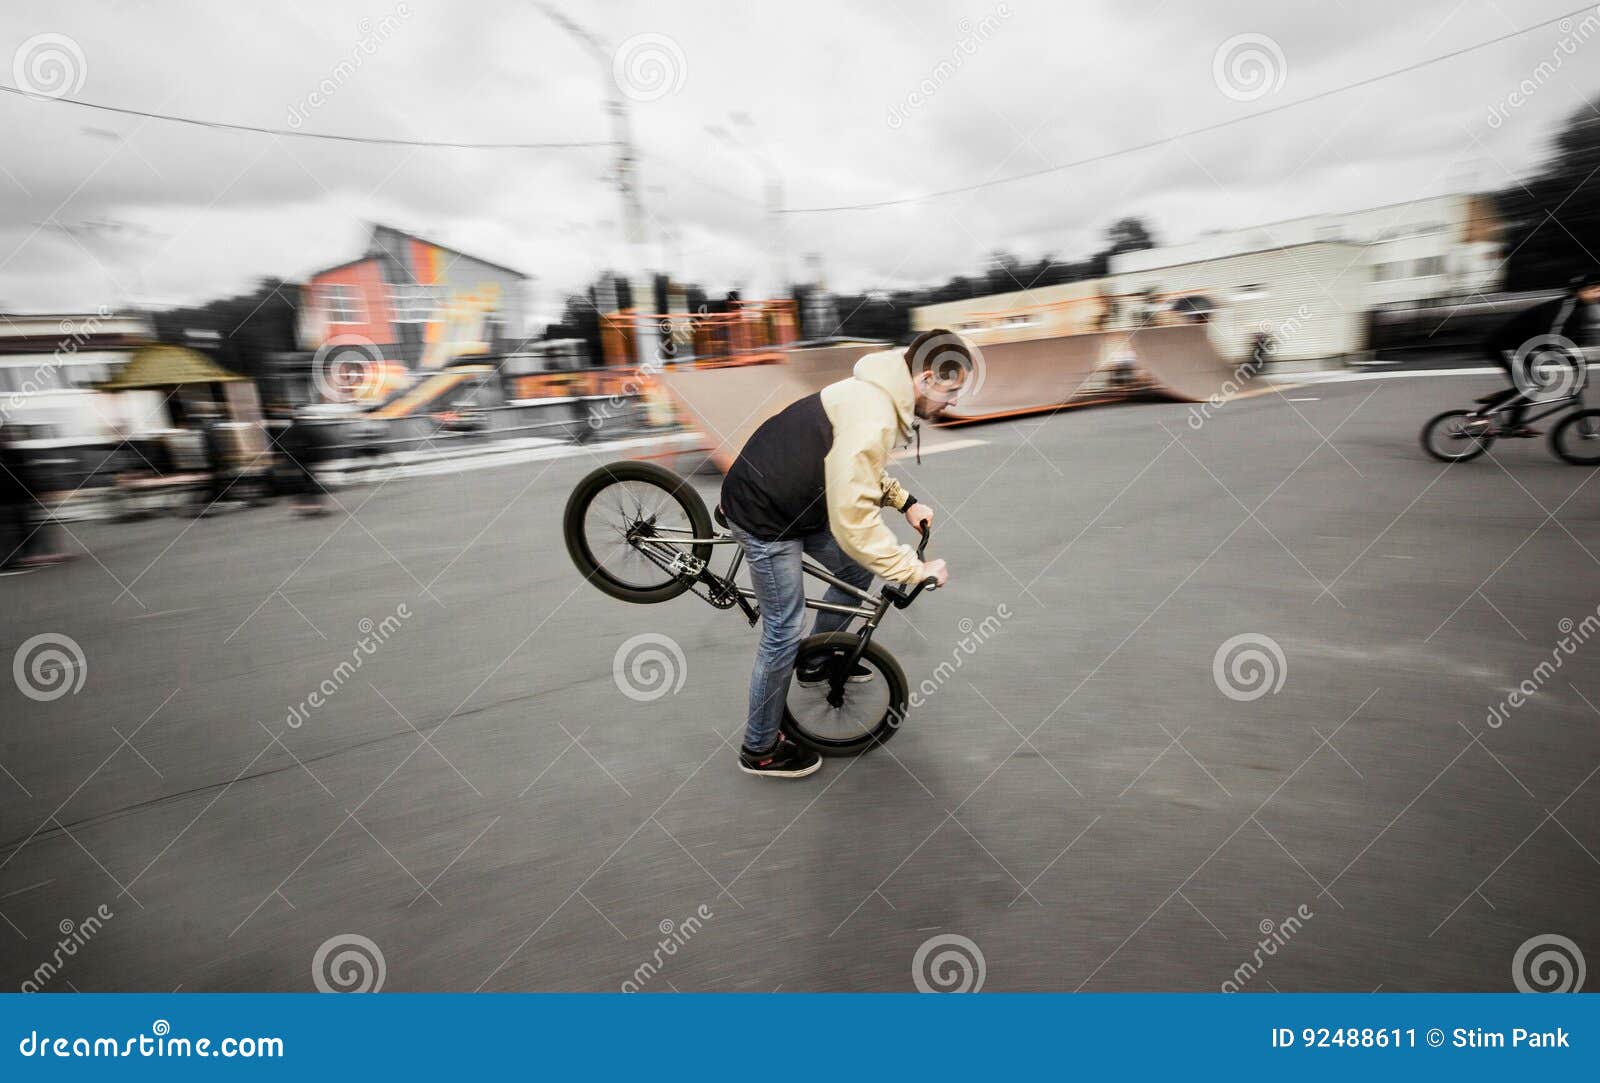 Street Youth Hobbies. editorial photo. Image of bikers - 92488611